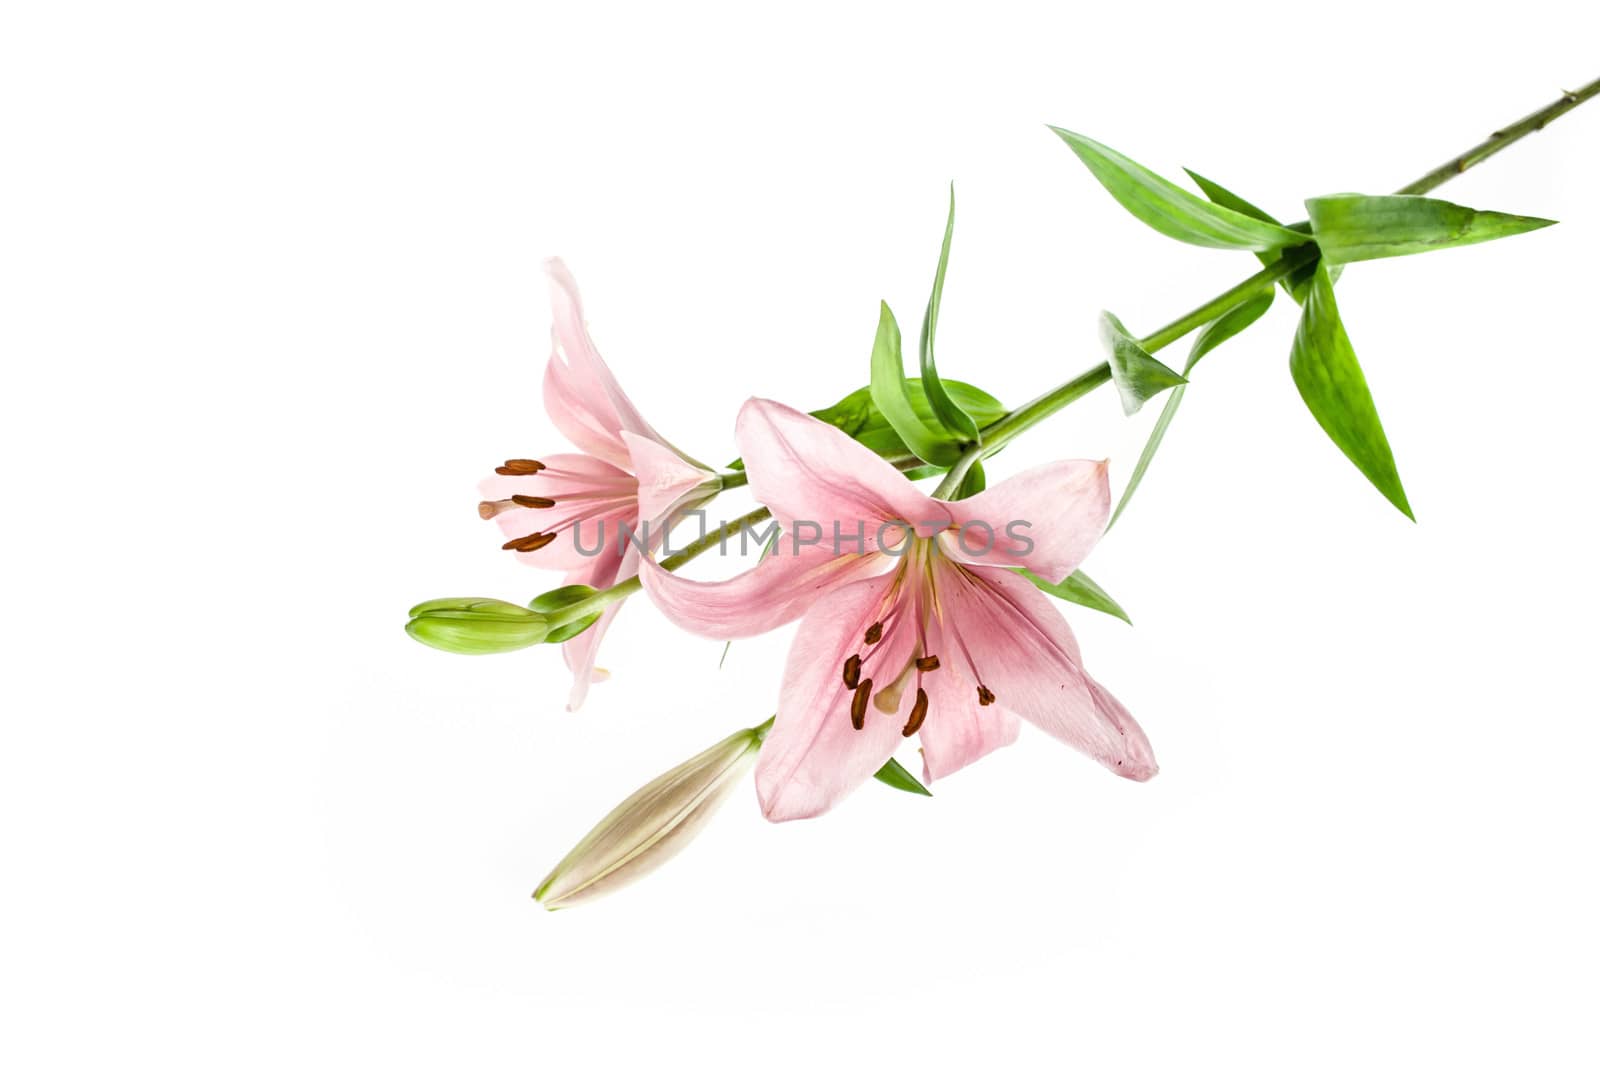 Lily flower by Sportactive